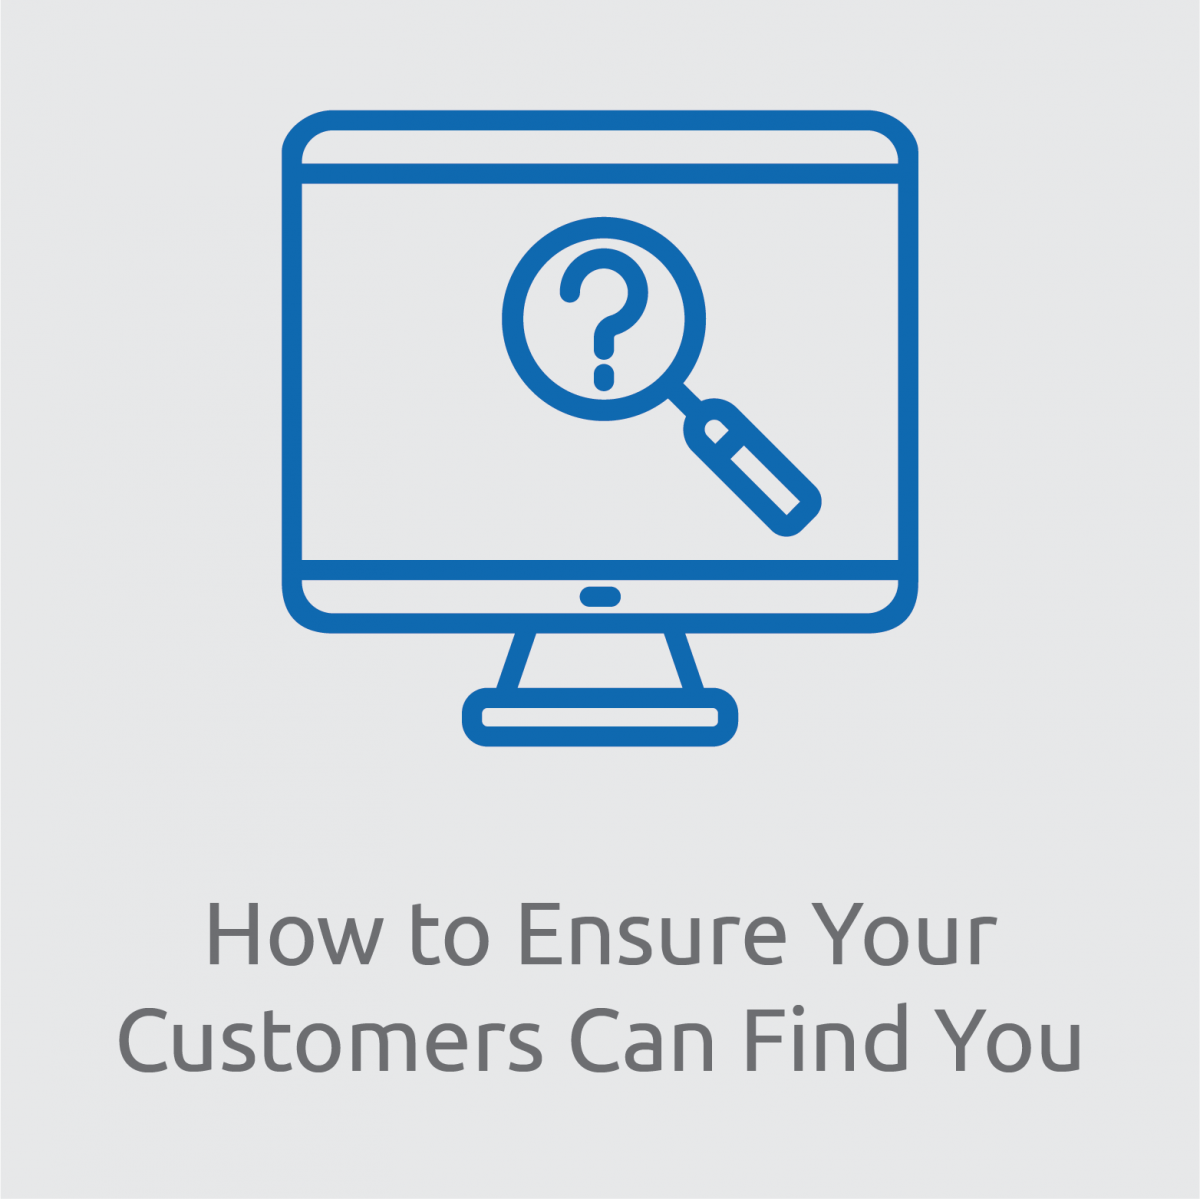 How to Ensure Your Customers Can Find You